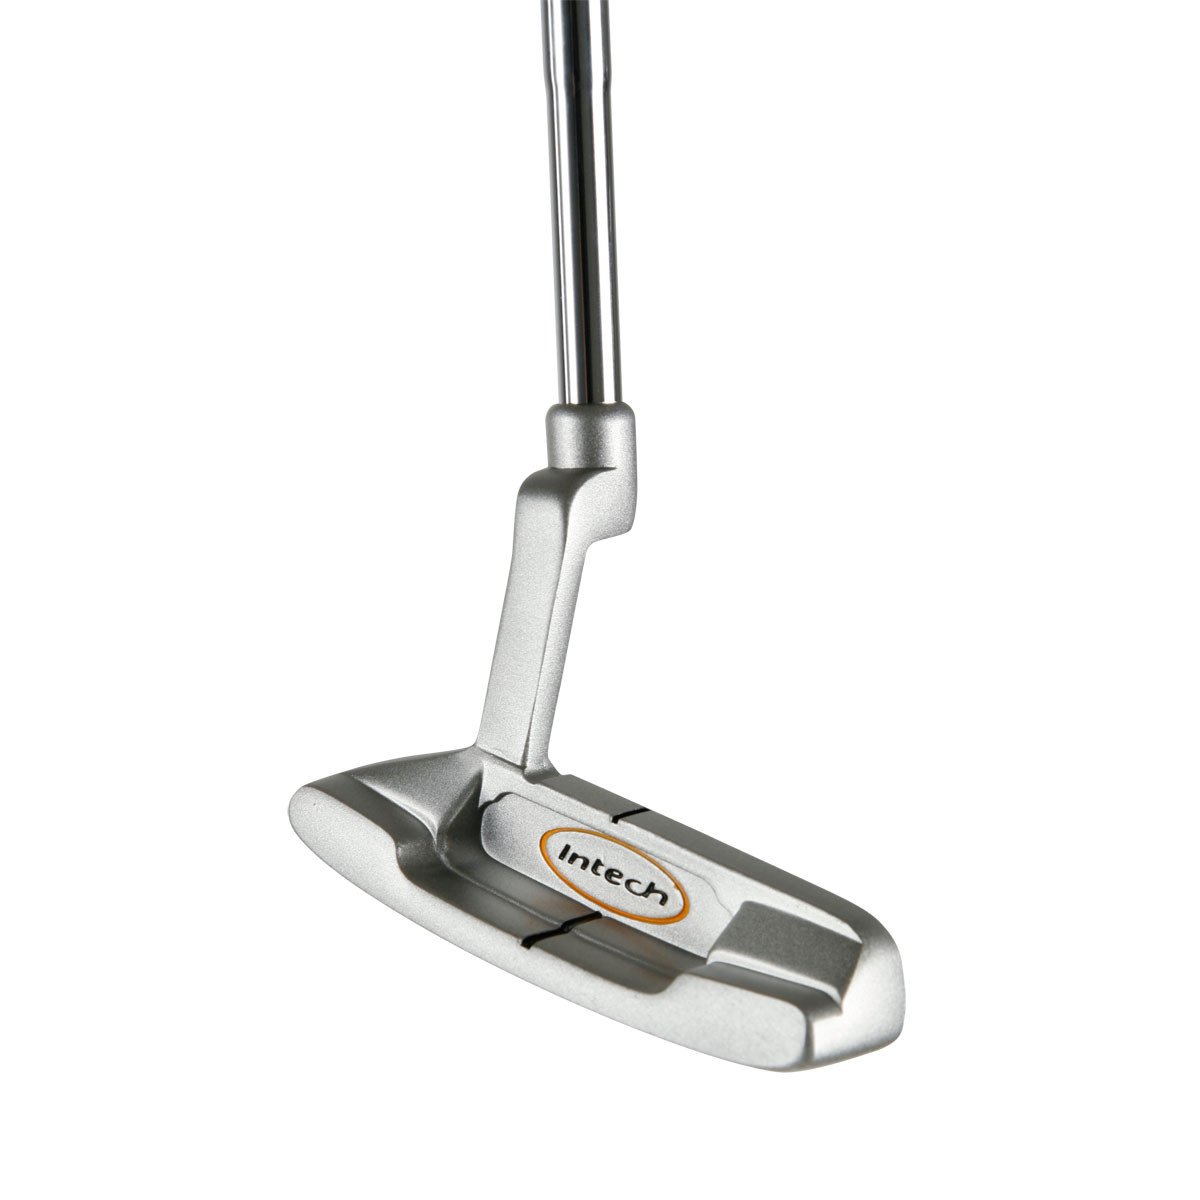 Intech Future Tour Pee Wee Putter (Right-Handed, Steel Shaft, Age 5 and Under)